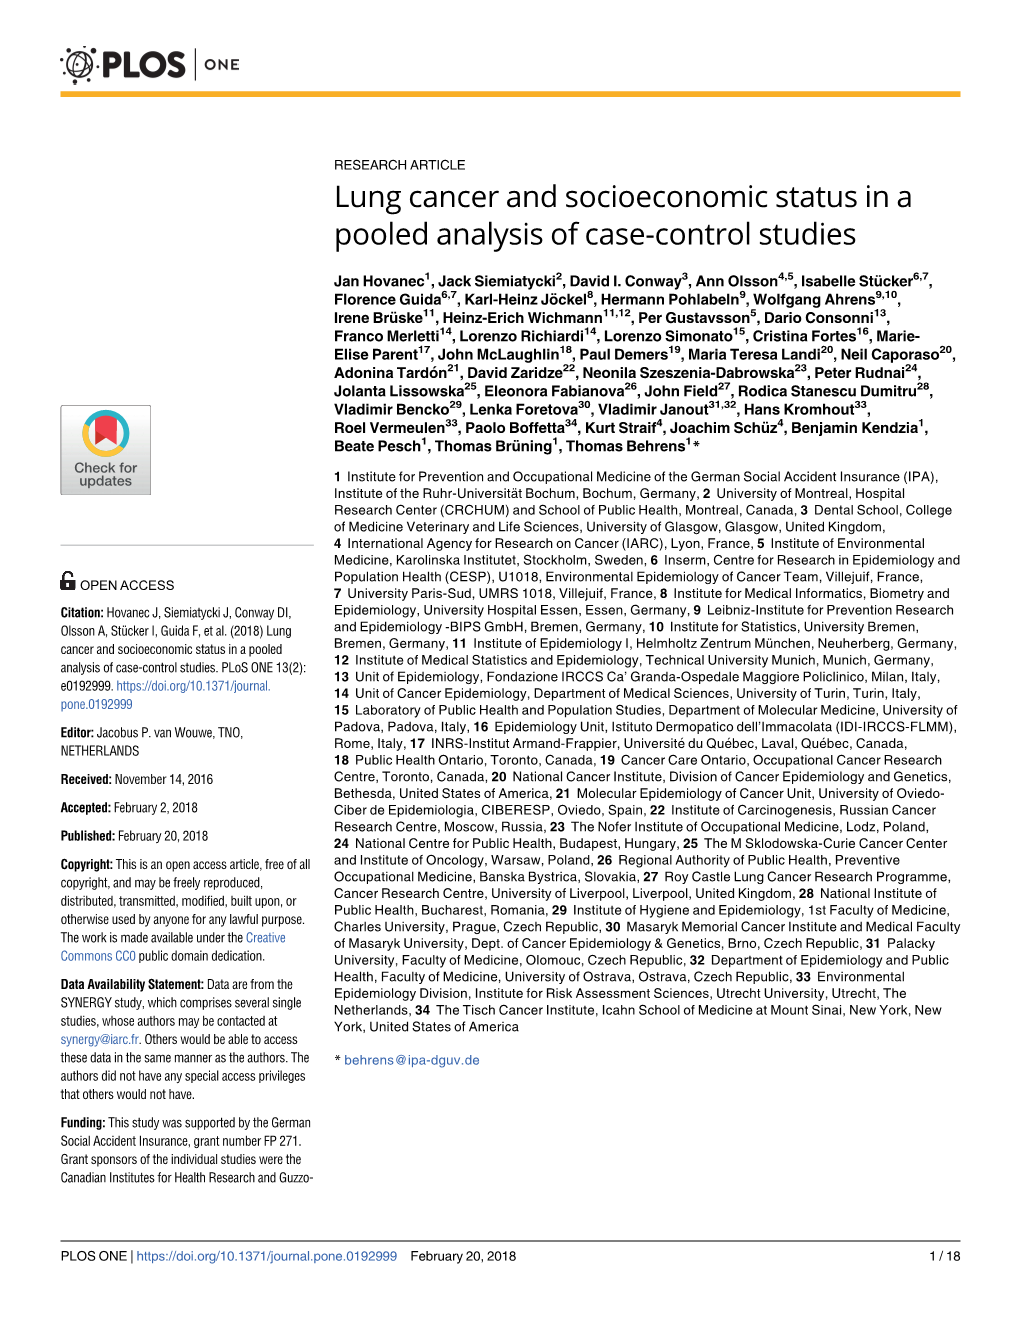 Lung Cancer and Socioeconomic Status in a Pooled Analysis of Case-Control Studies